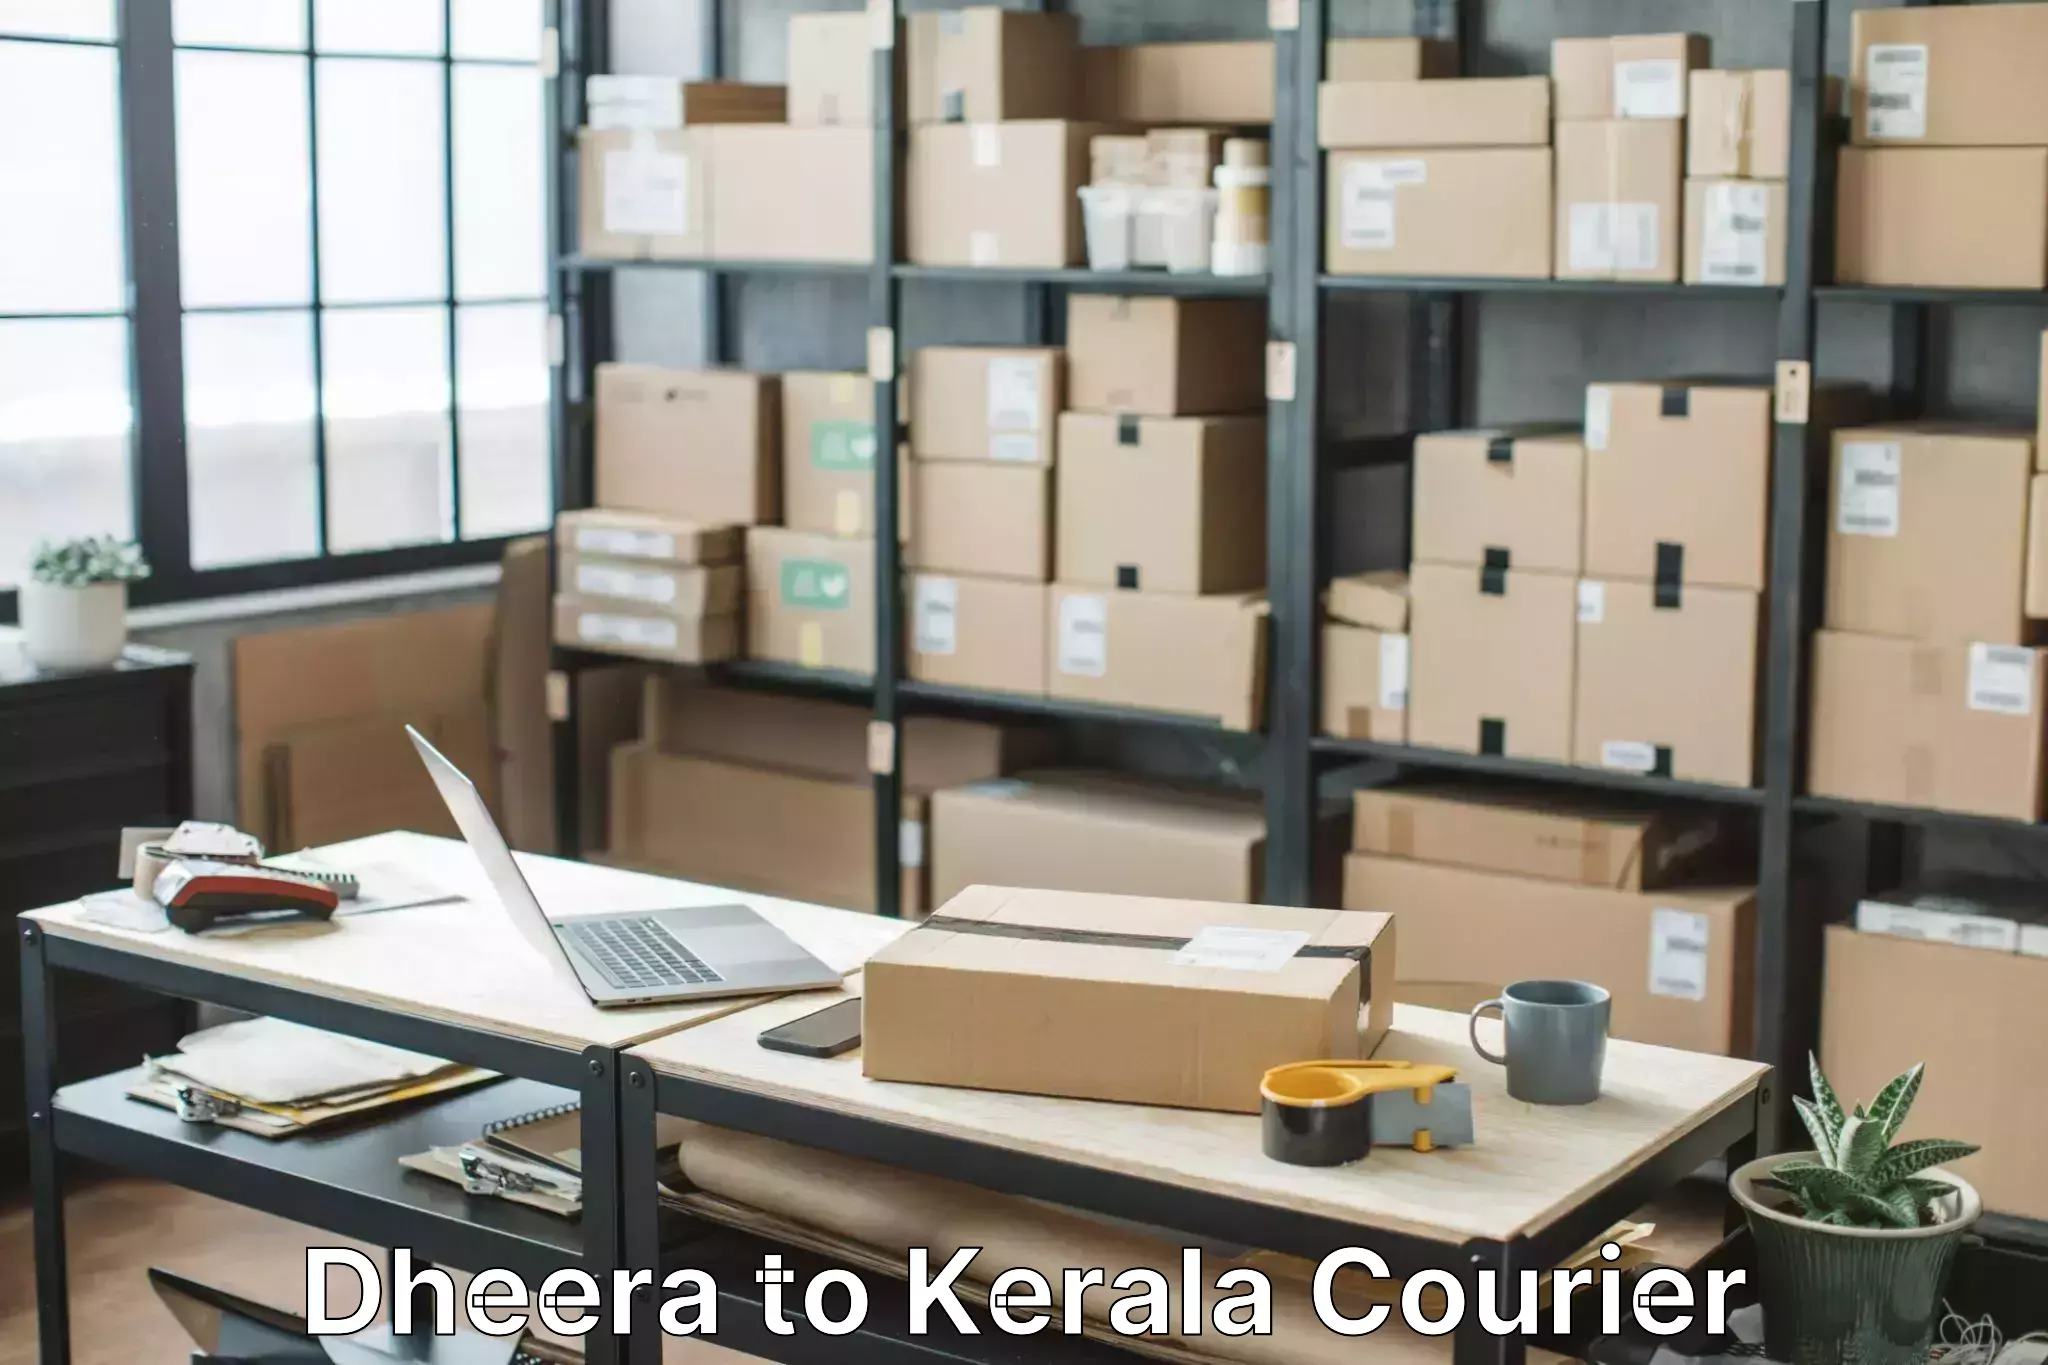 Hassle-free relocation Dheera to Kochi